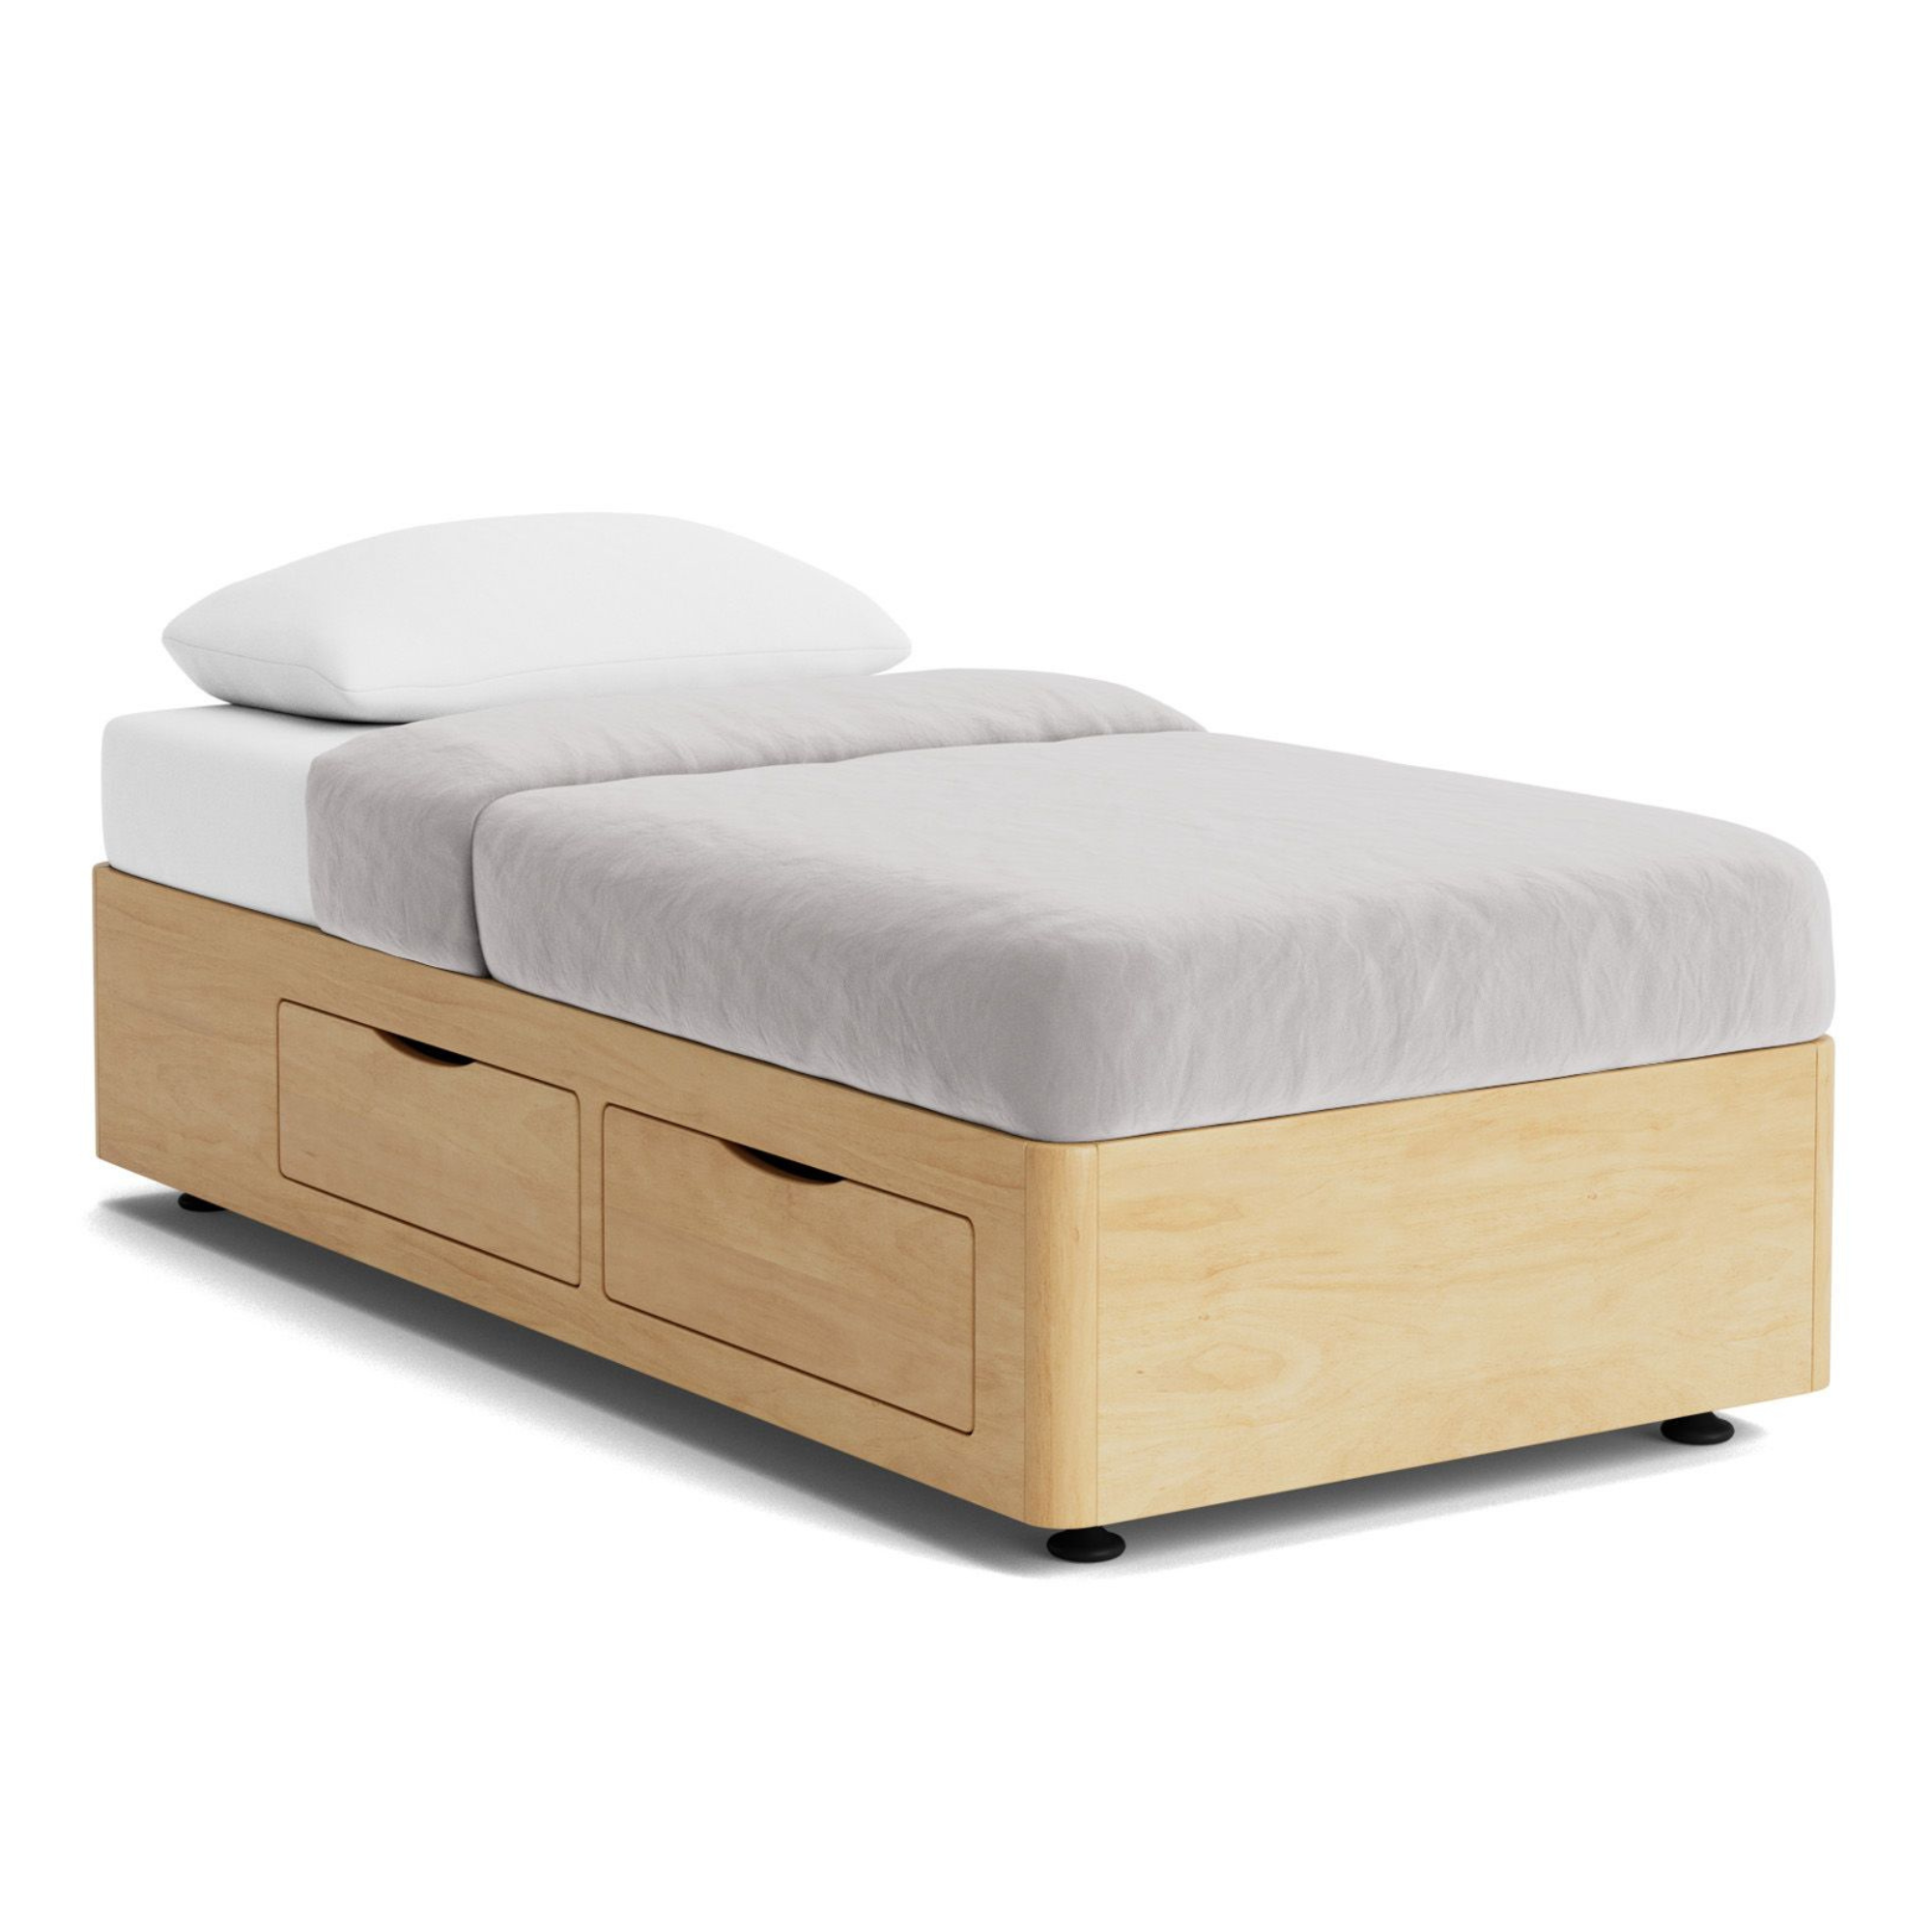 SLEEPNEAT SINGLE OR KING SINGLE BED BASE | WITH OR WITHOUT DRAWERS | NZ MADE